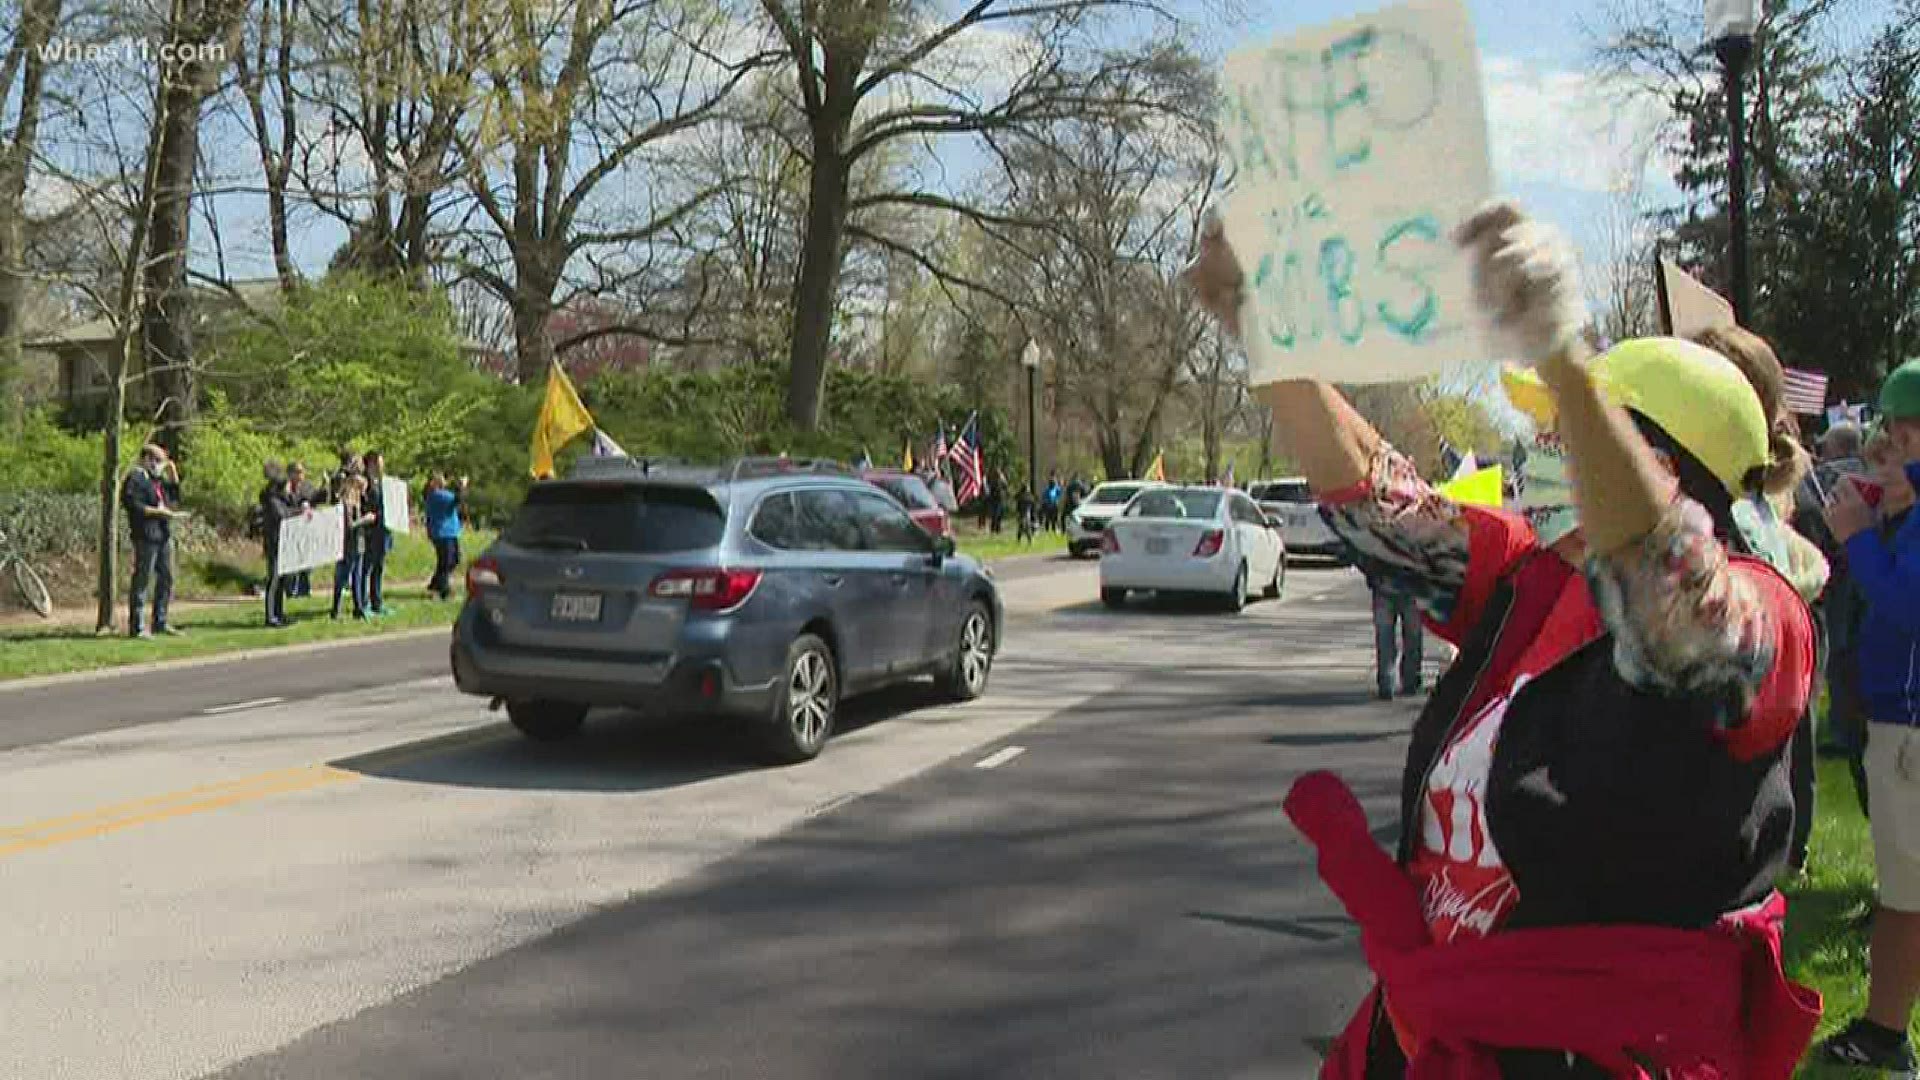 Protesters stood in front of the Indiana governor's mansion demanding the state be reopened even though COVID-19 cases and deaths are on the rise.